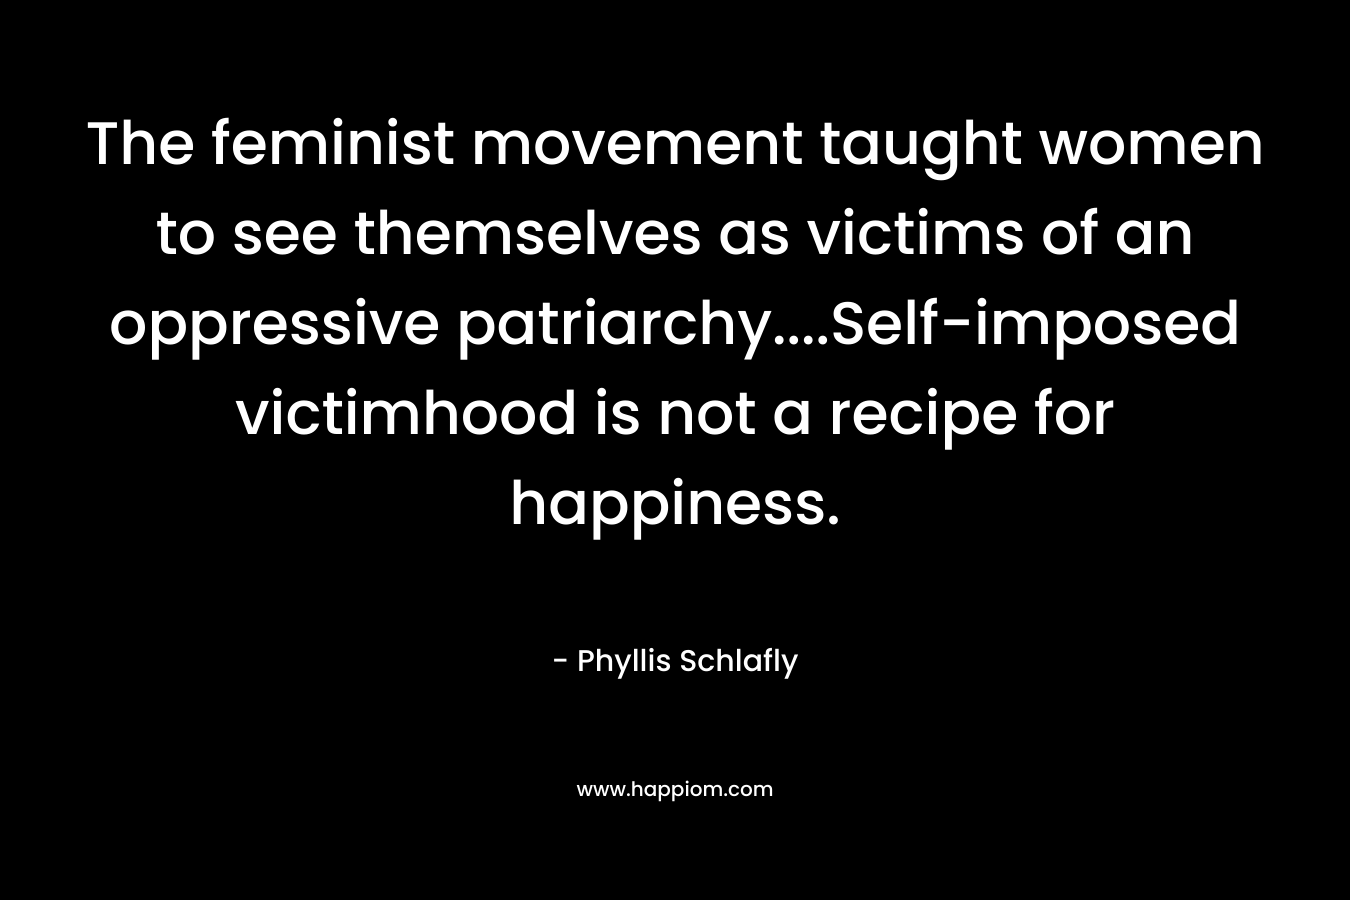 The feminist movement taught women to see themselves as victims of an oppressive patriarchy….Self-imposed victimhood is not a recipe for happiness. – Phyllis Schlafly